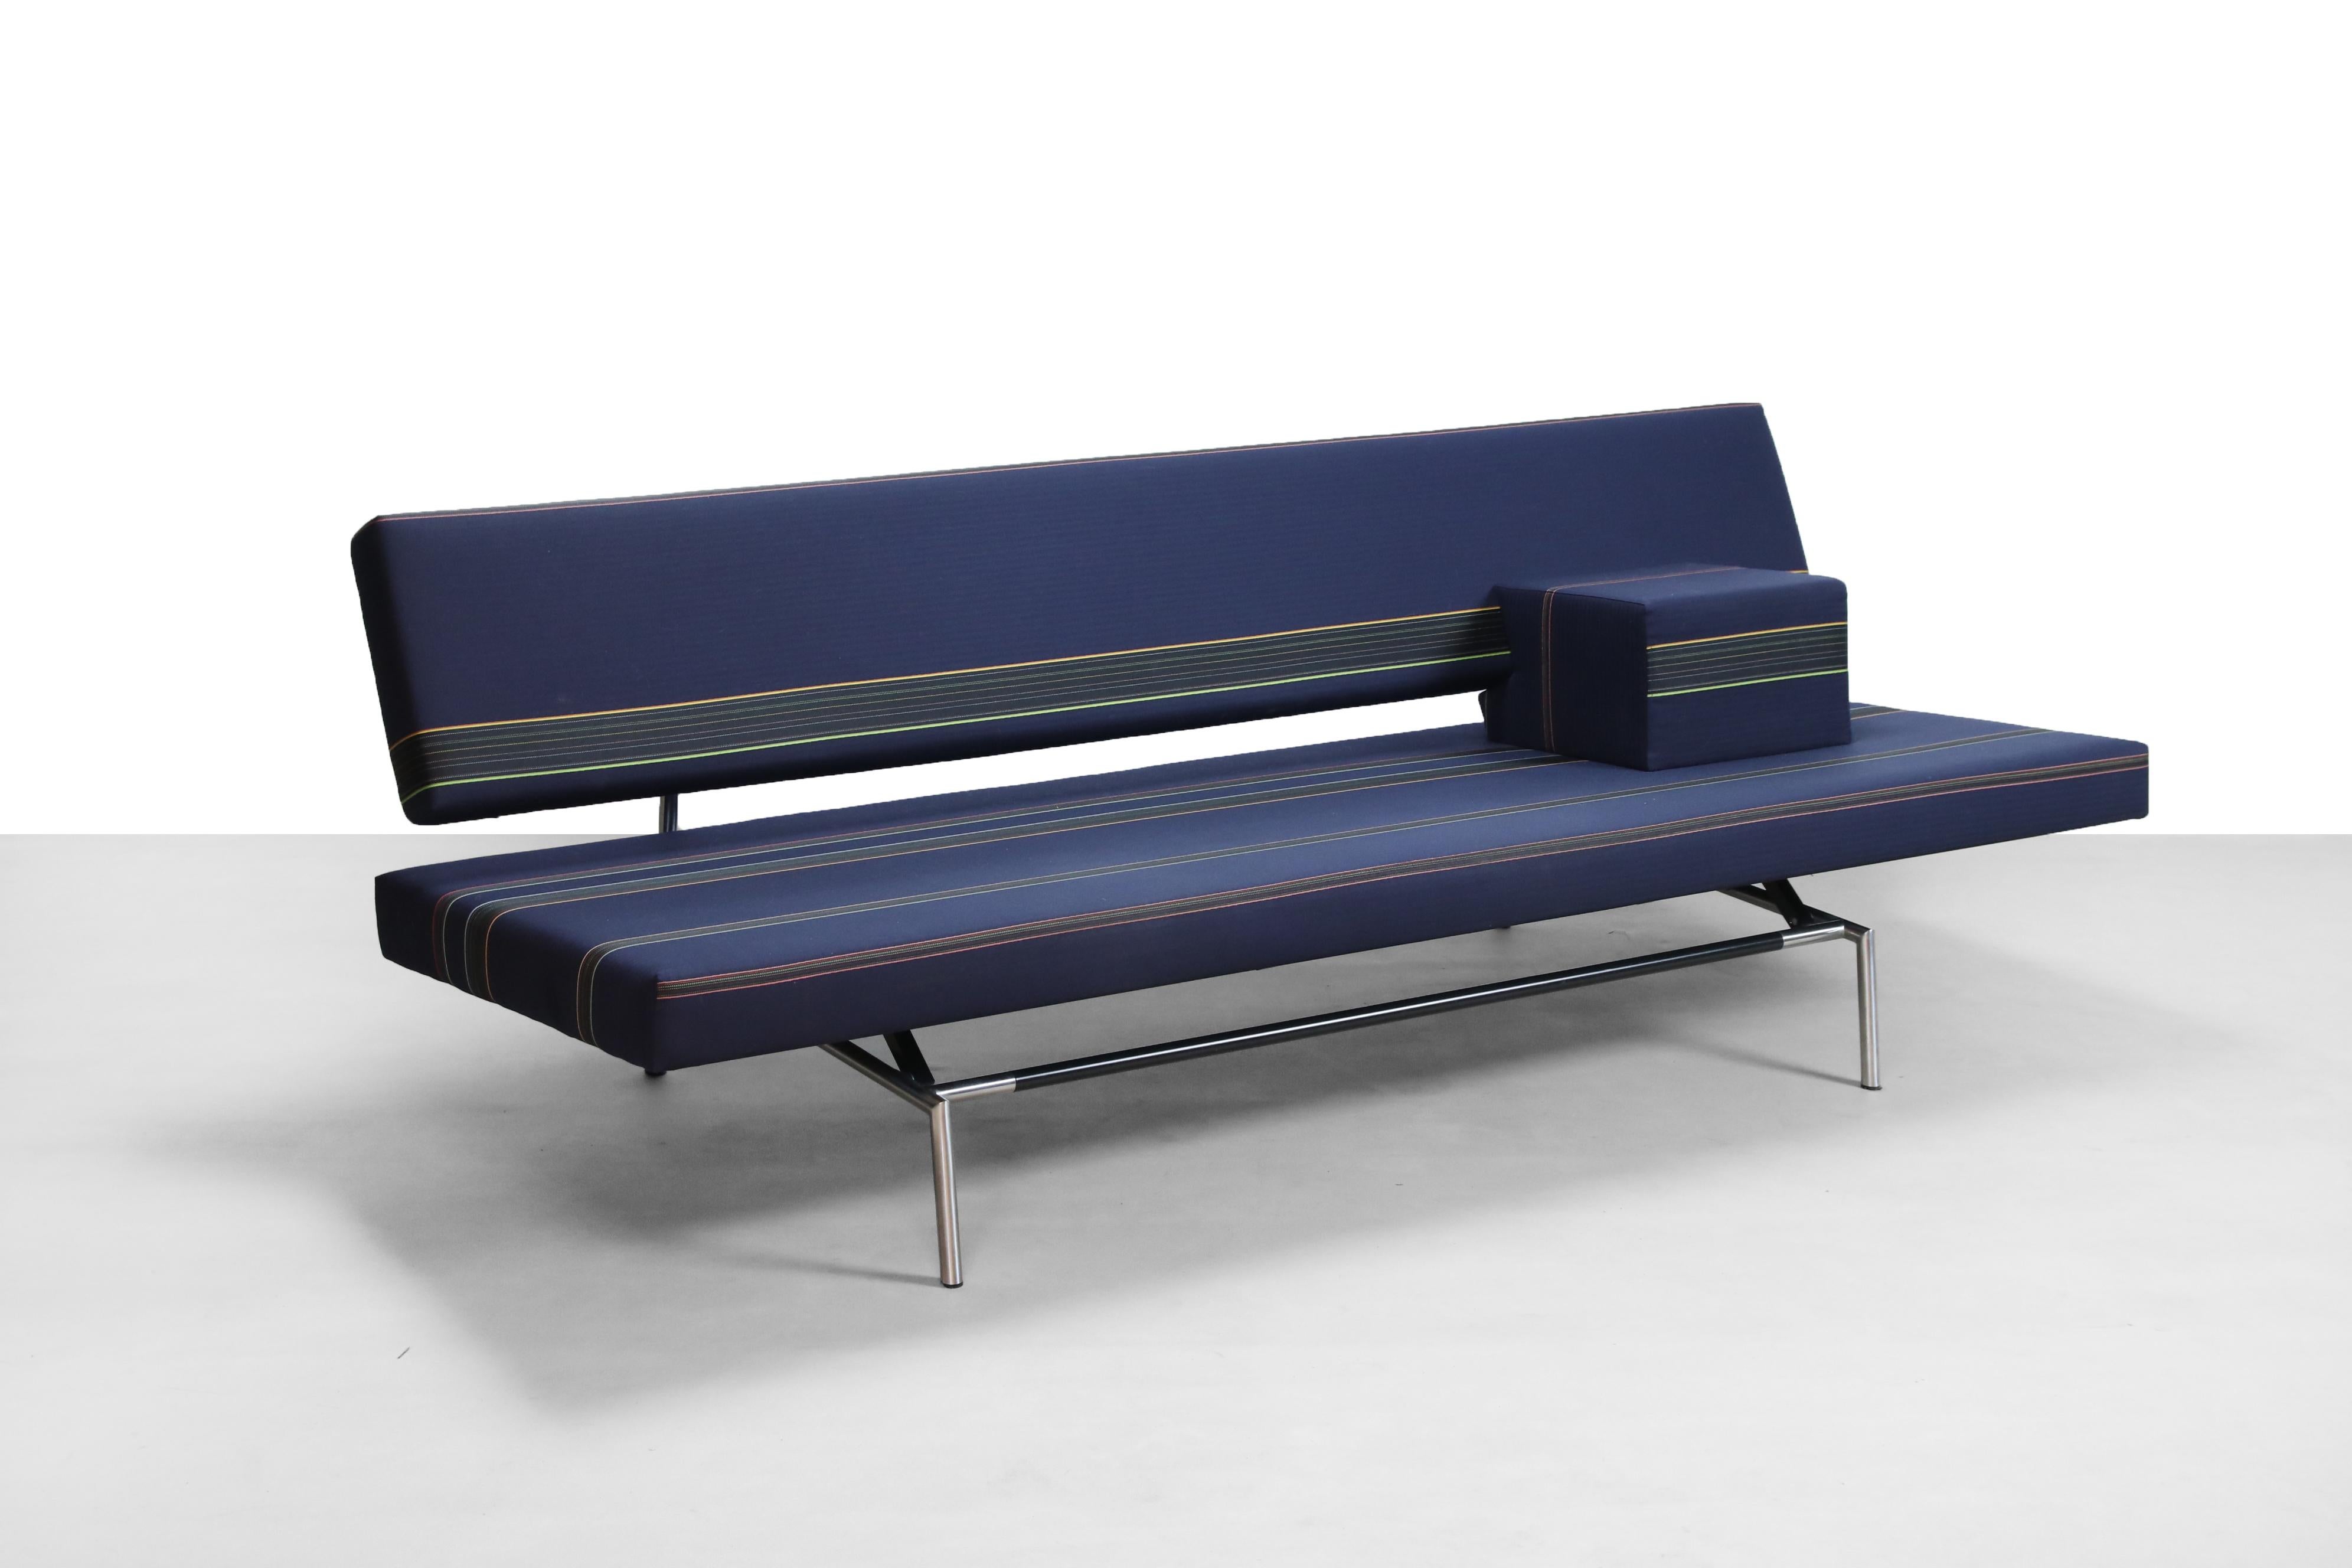 This Dutch design icon was designed by Martin Visser for Spectrum, The Netherlands. 
This sofa, called model BR02, is beautiful in its simplicity. Simple design yet super comfortable. Upholstered in a special designer fabric by Maharam for Kvadrat,